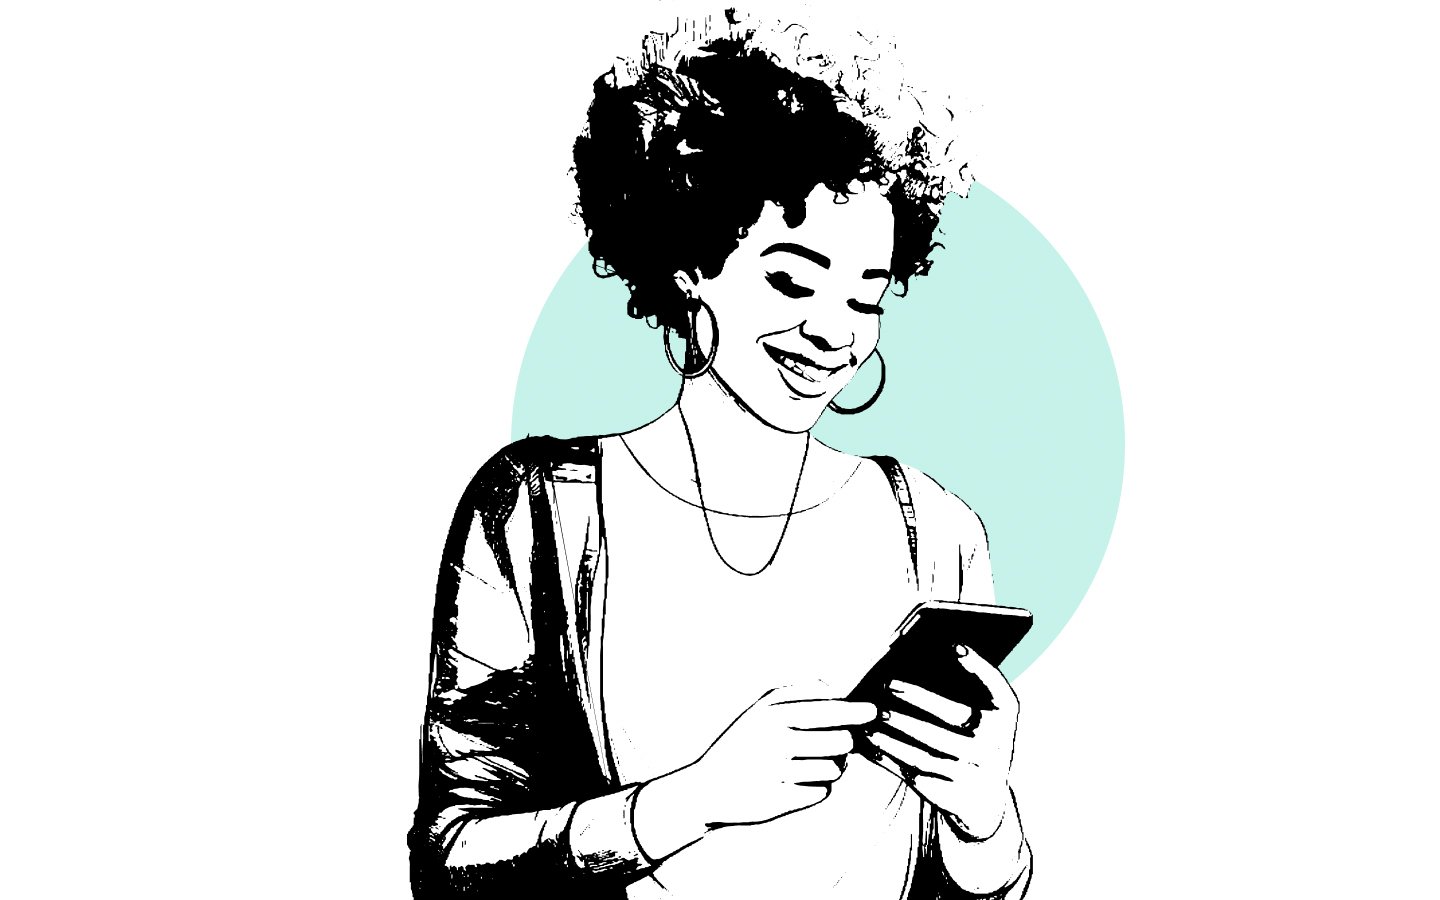 A smiling person reading of a mobile device